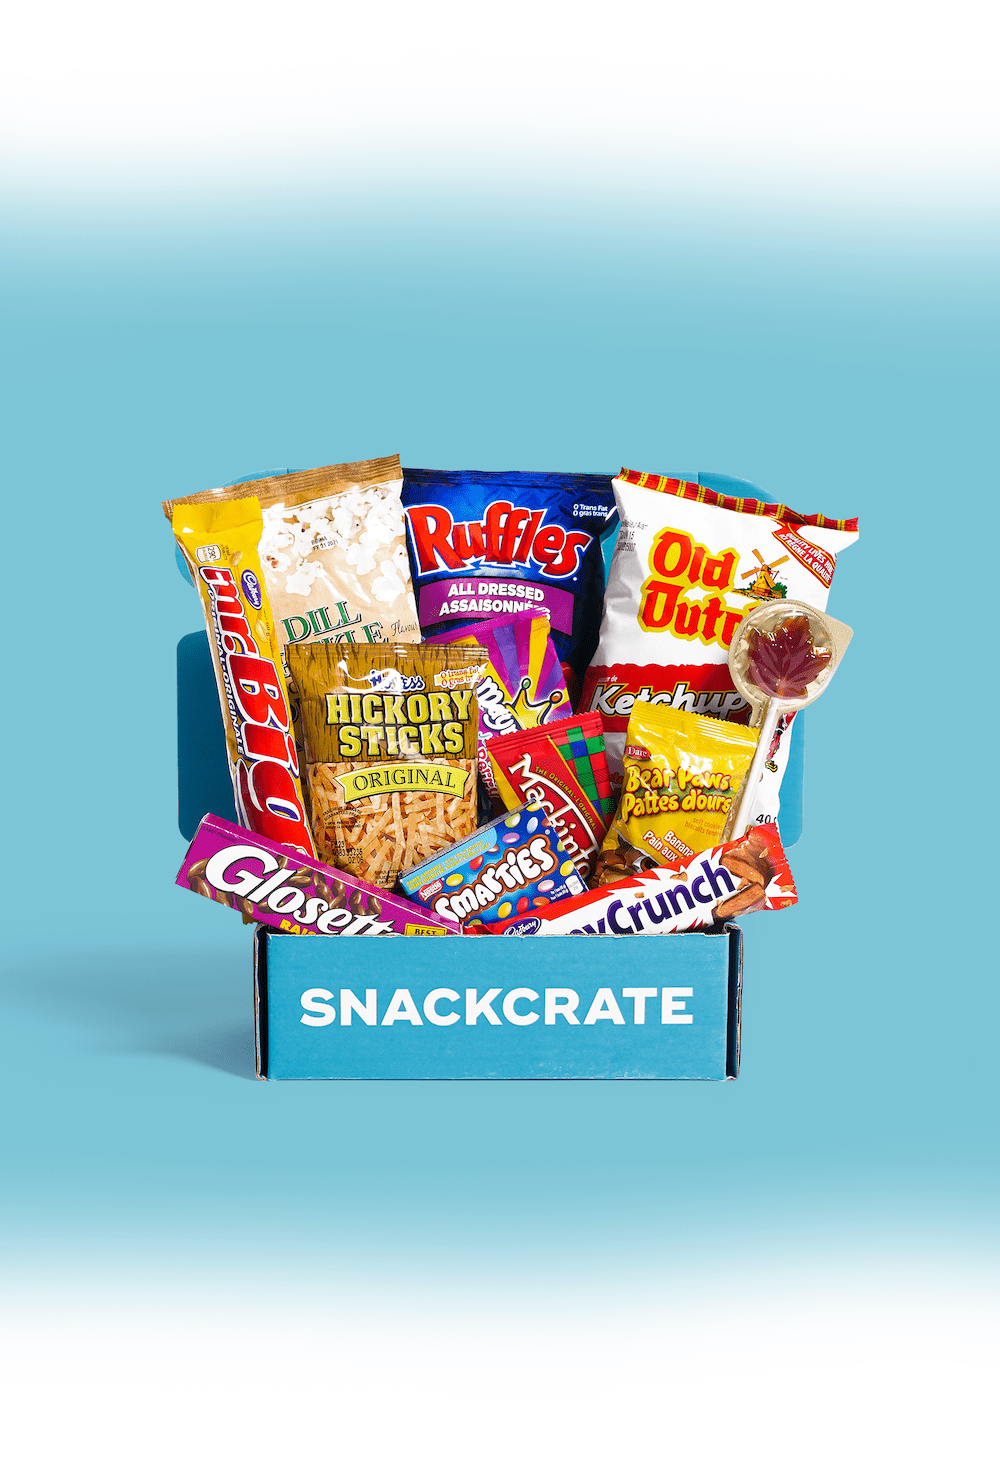 Canada snackcrate full of foreign snacks